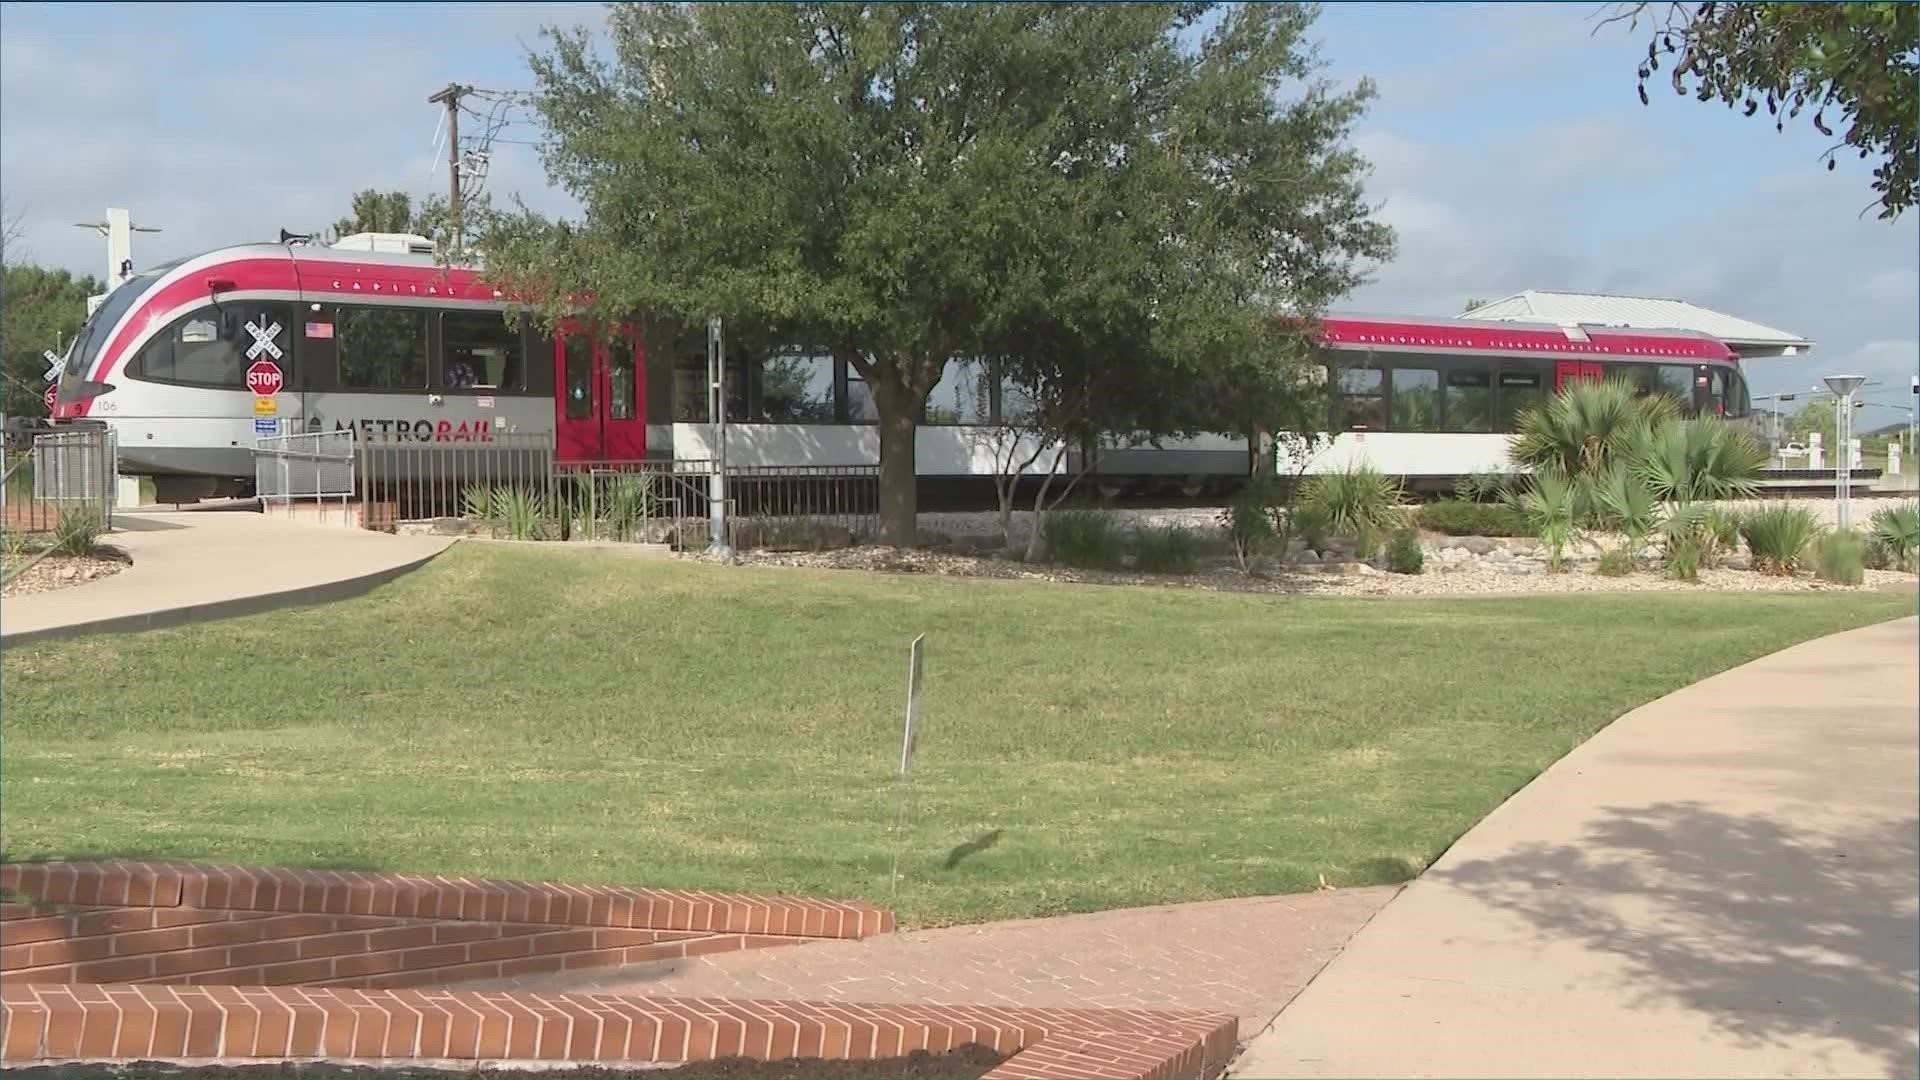 The station will provide better access to Q2 Stadium and the North Burnet area.